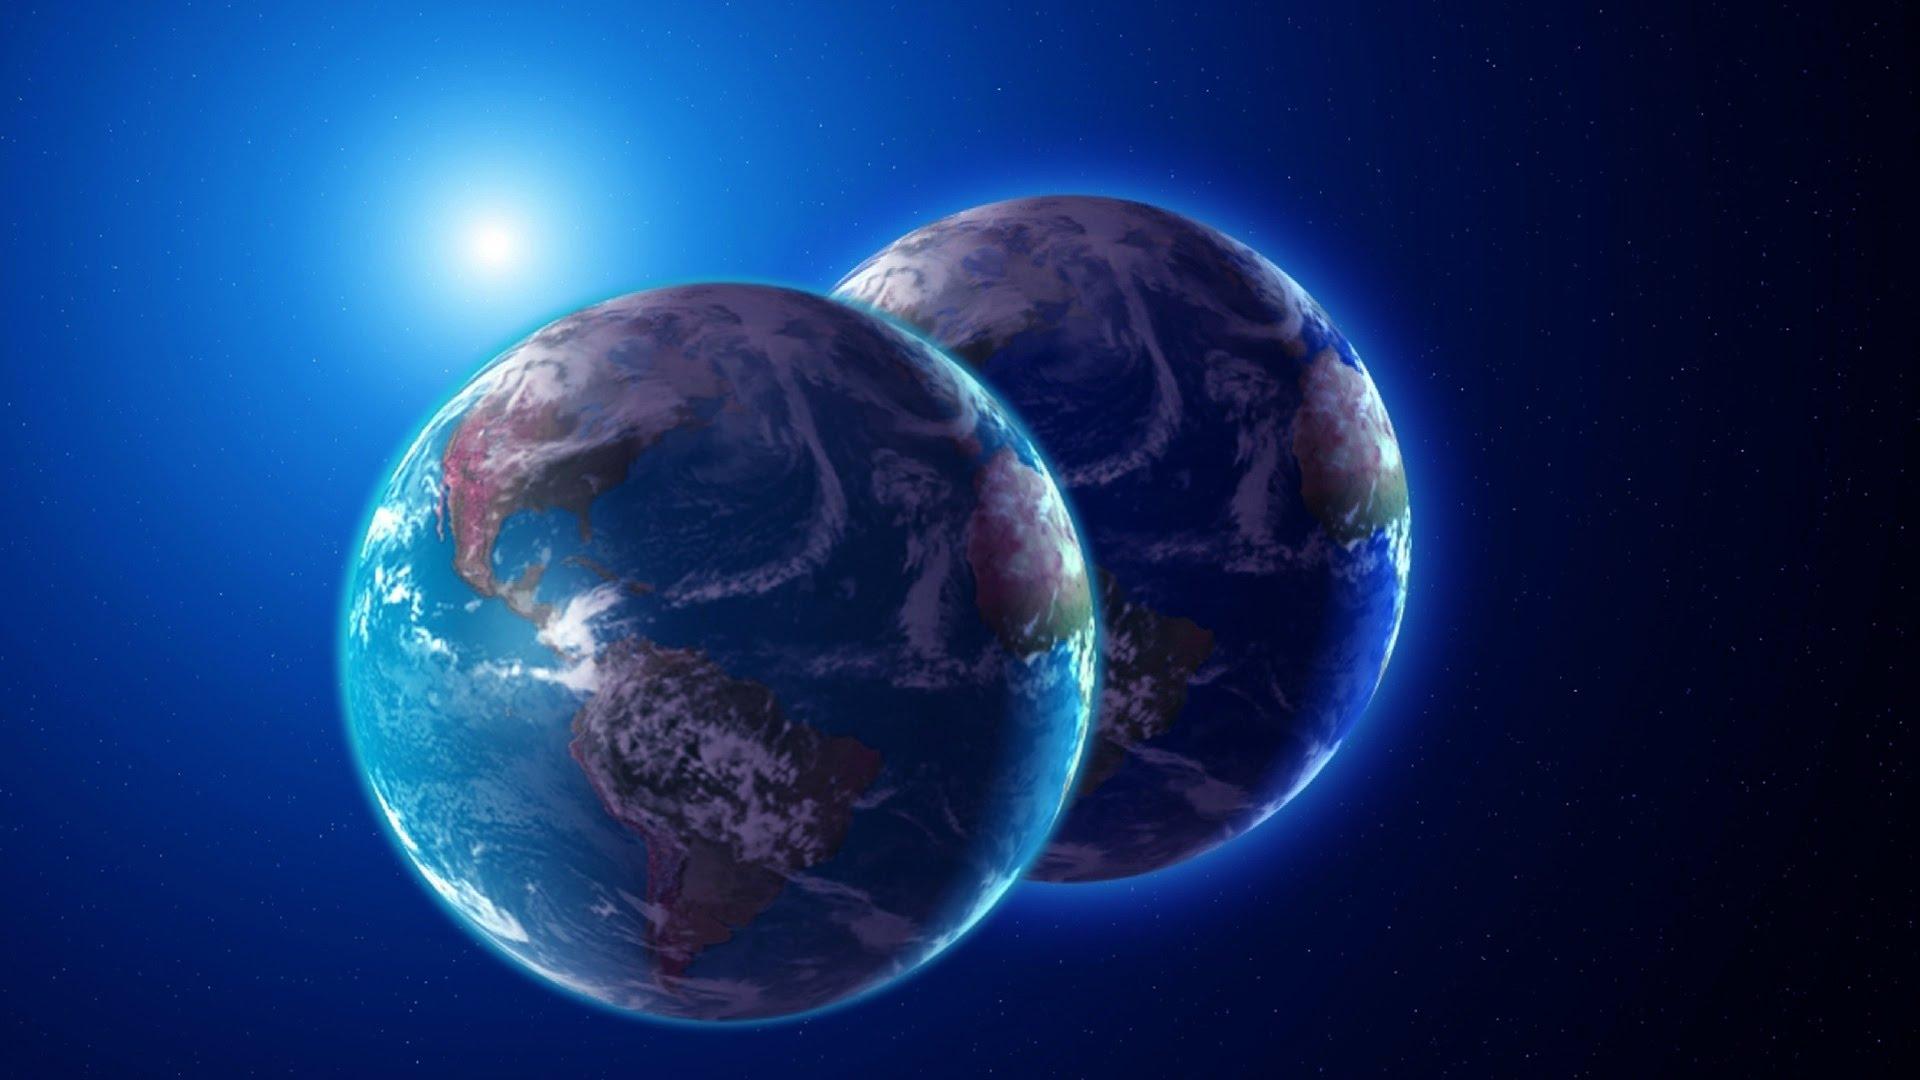 Earth has a “twin” planet